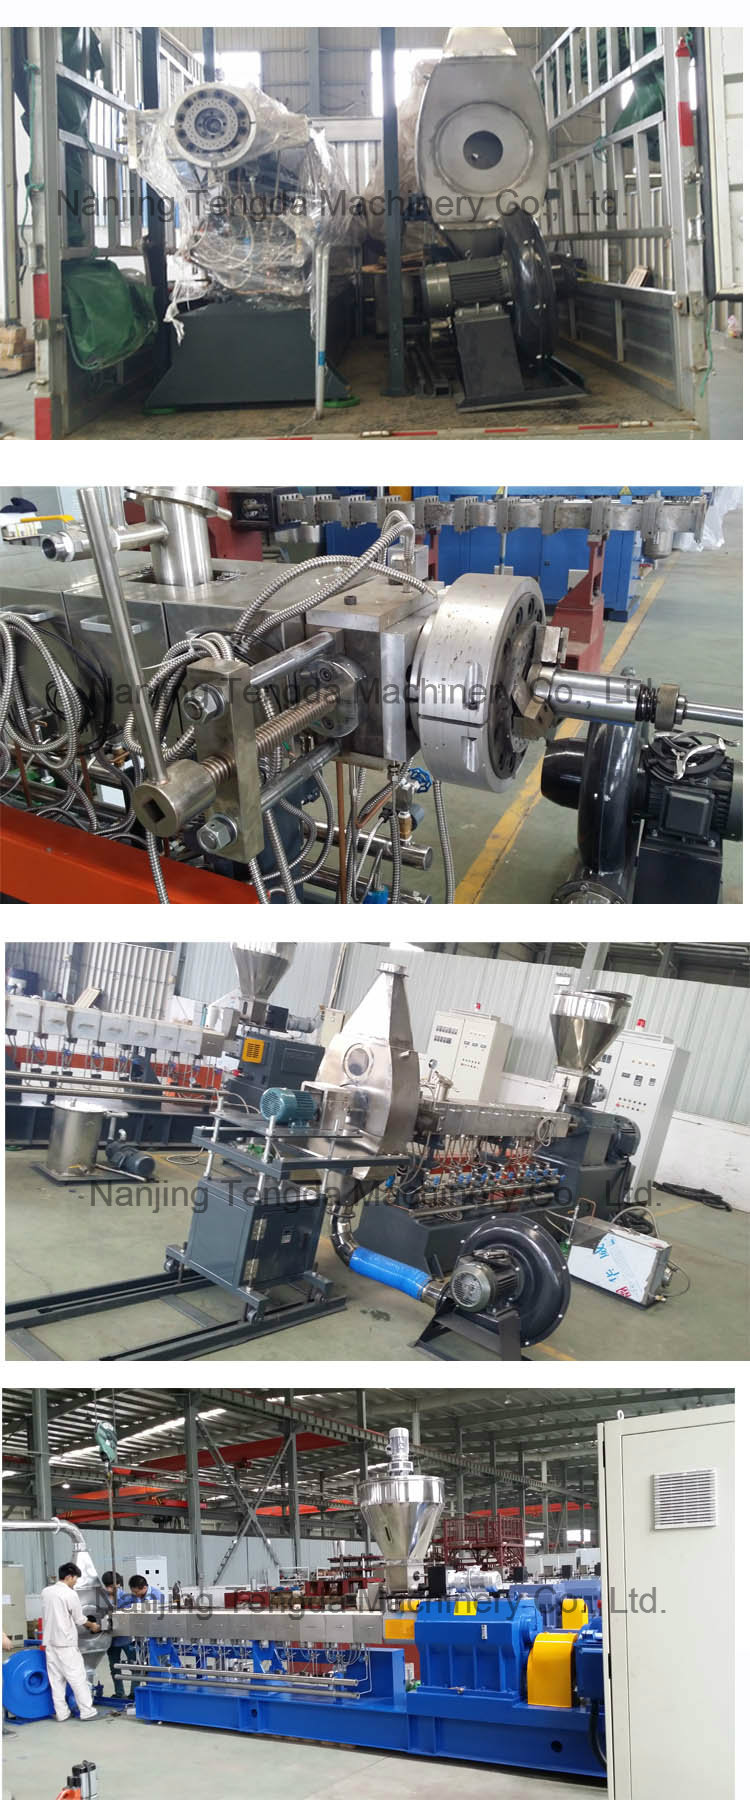 PP/PVC/ABS Nylon Extruder Machine with Convenience